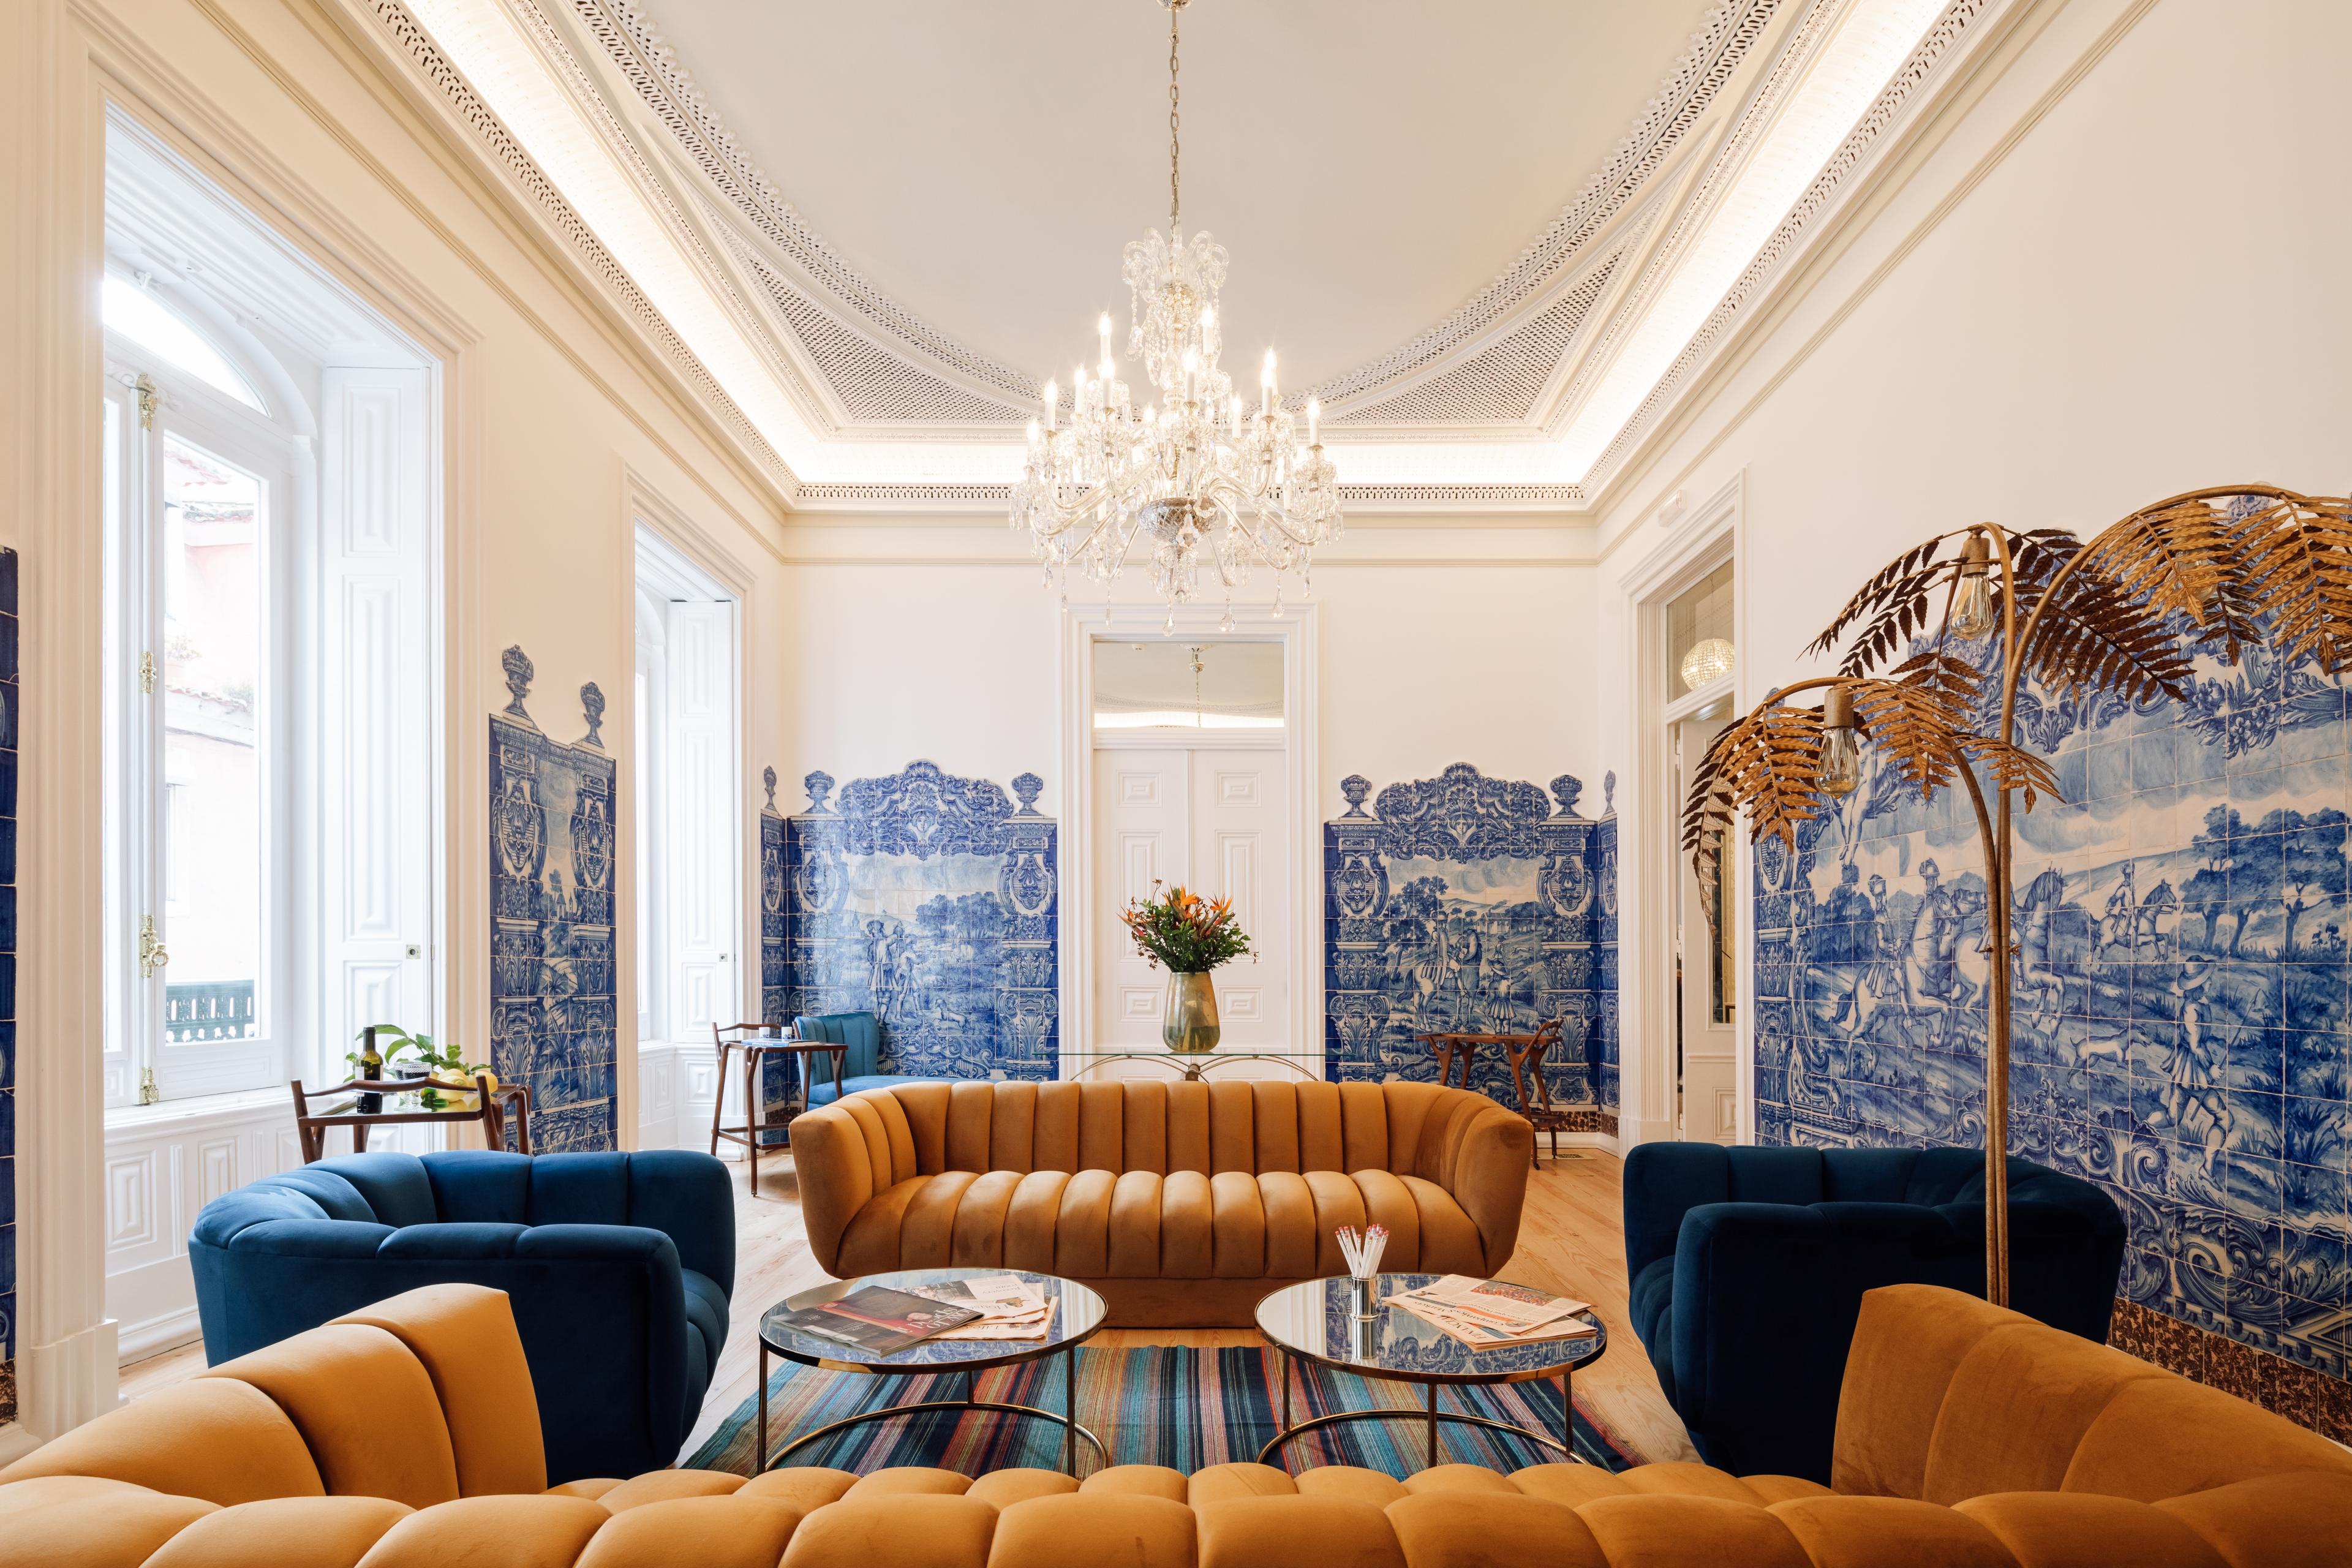 Sitting room with blue-tiled scenes on the walls, camel-colored couches, and blue velvet sitting chairs 